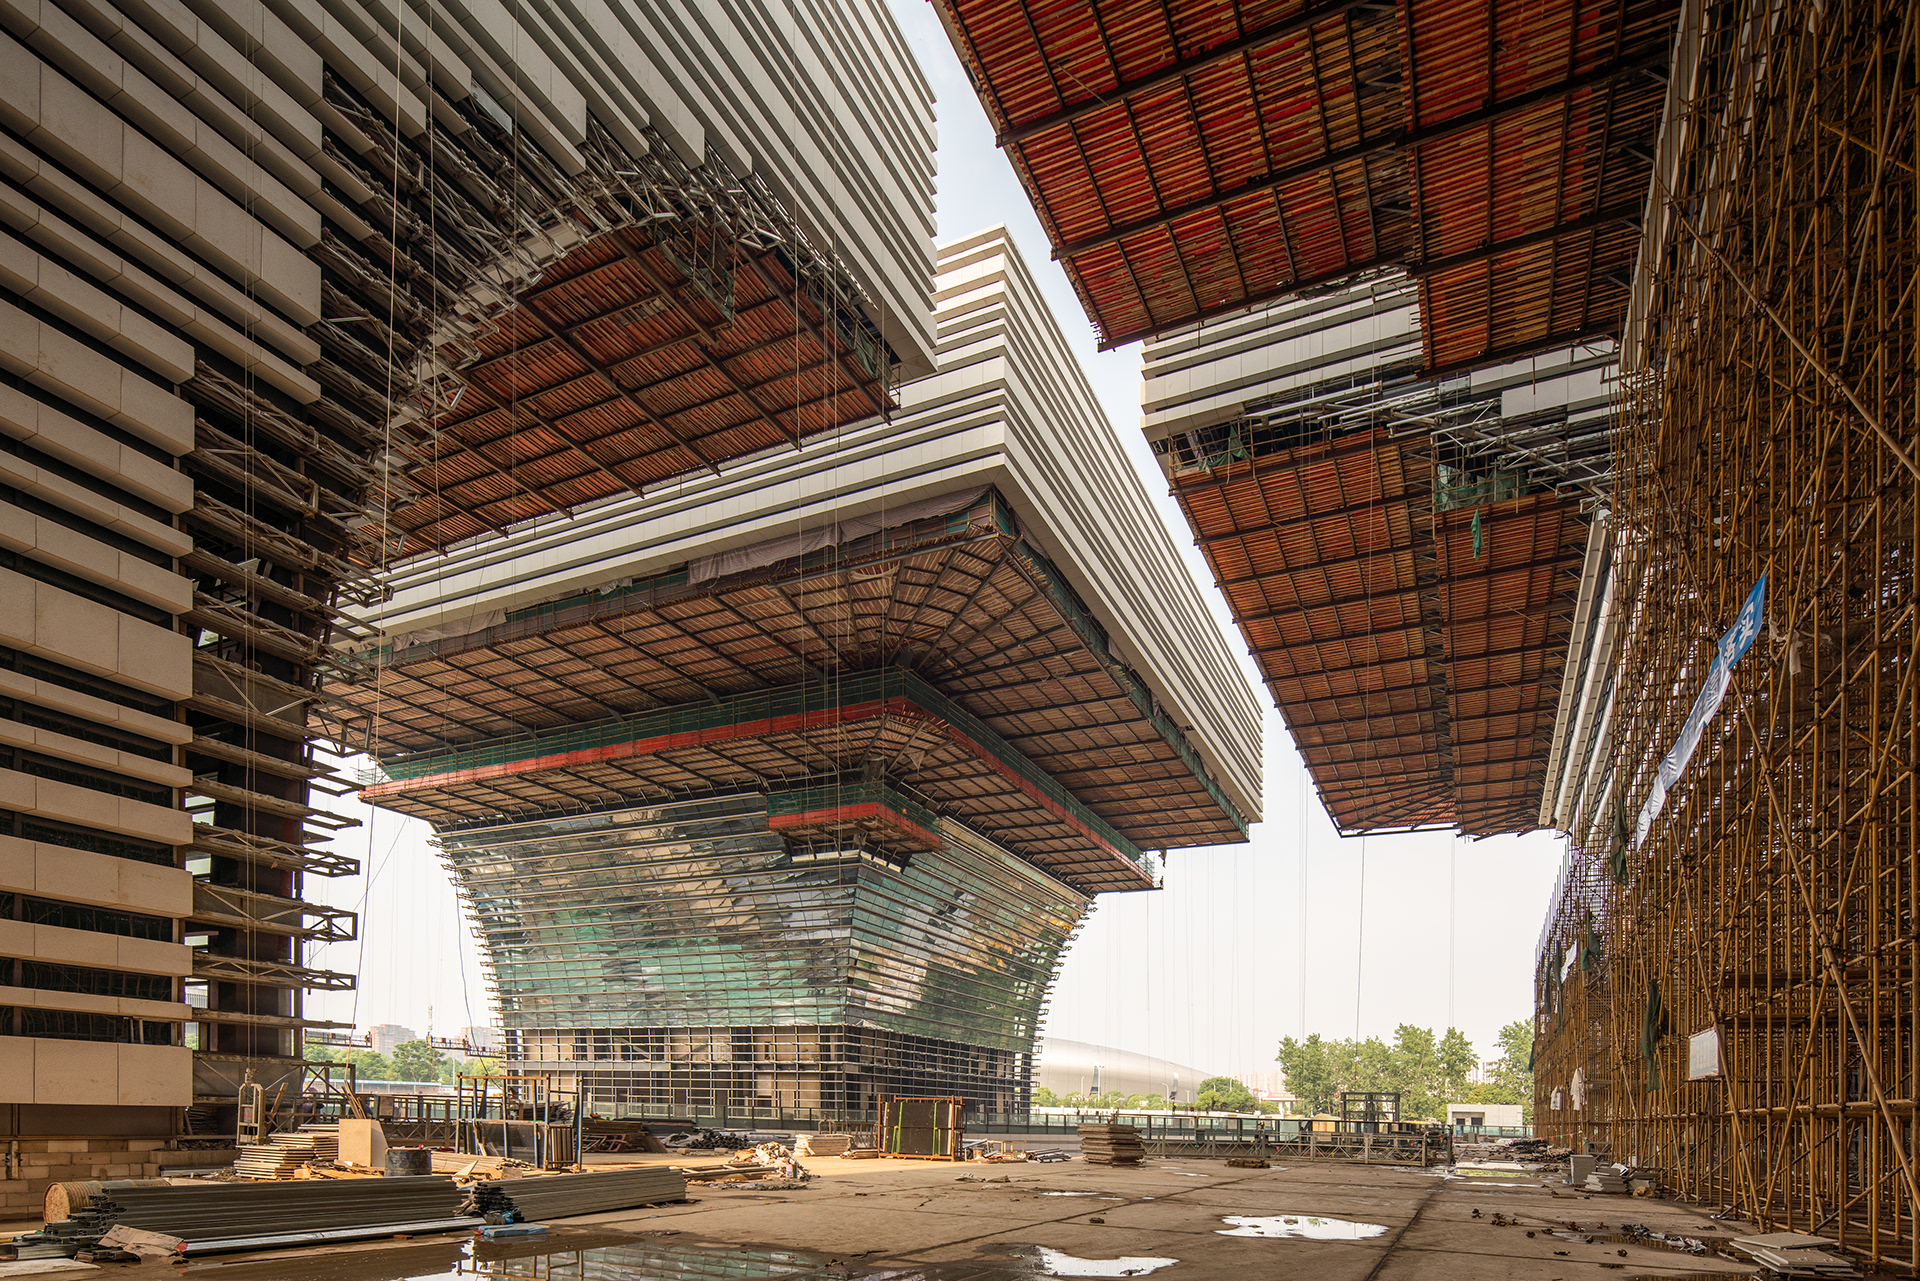 Colossal construction of an upcoming Culture Center in Changzhou, China